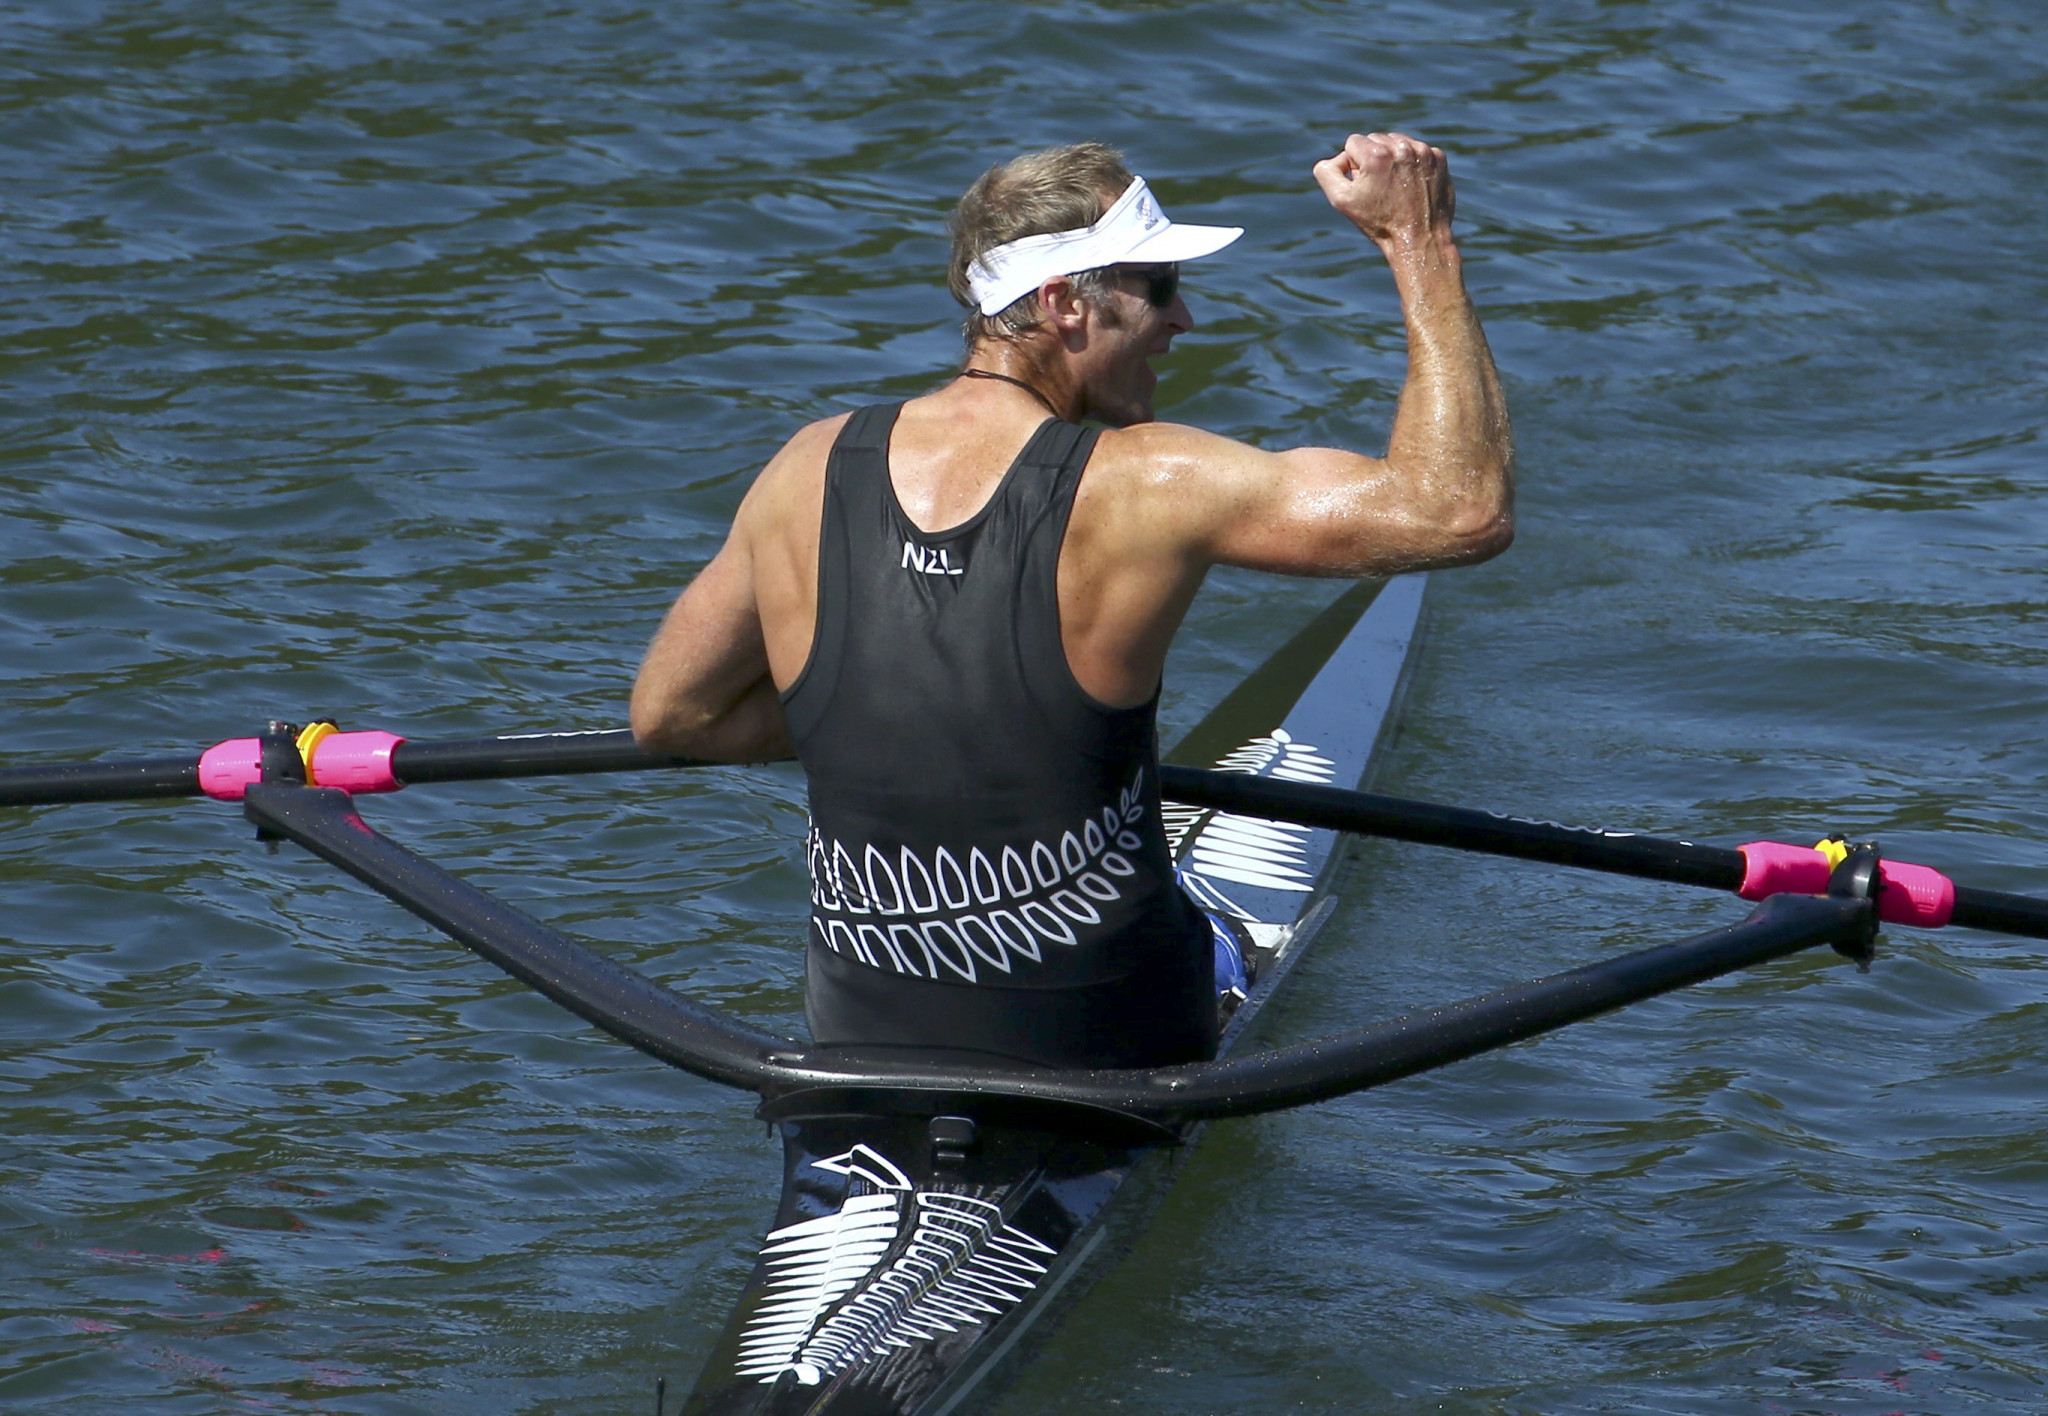 New Zealand's Olympic champion Mahe Drysdale will be part of a hugely competitive men's single sculls fleet ©Getty Images